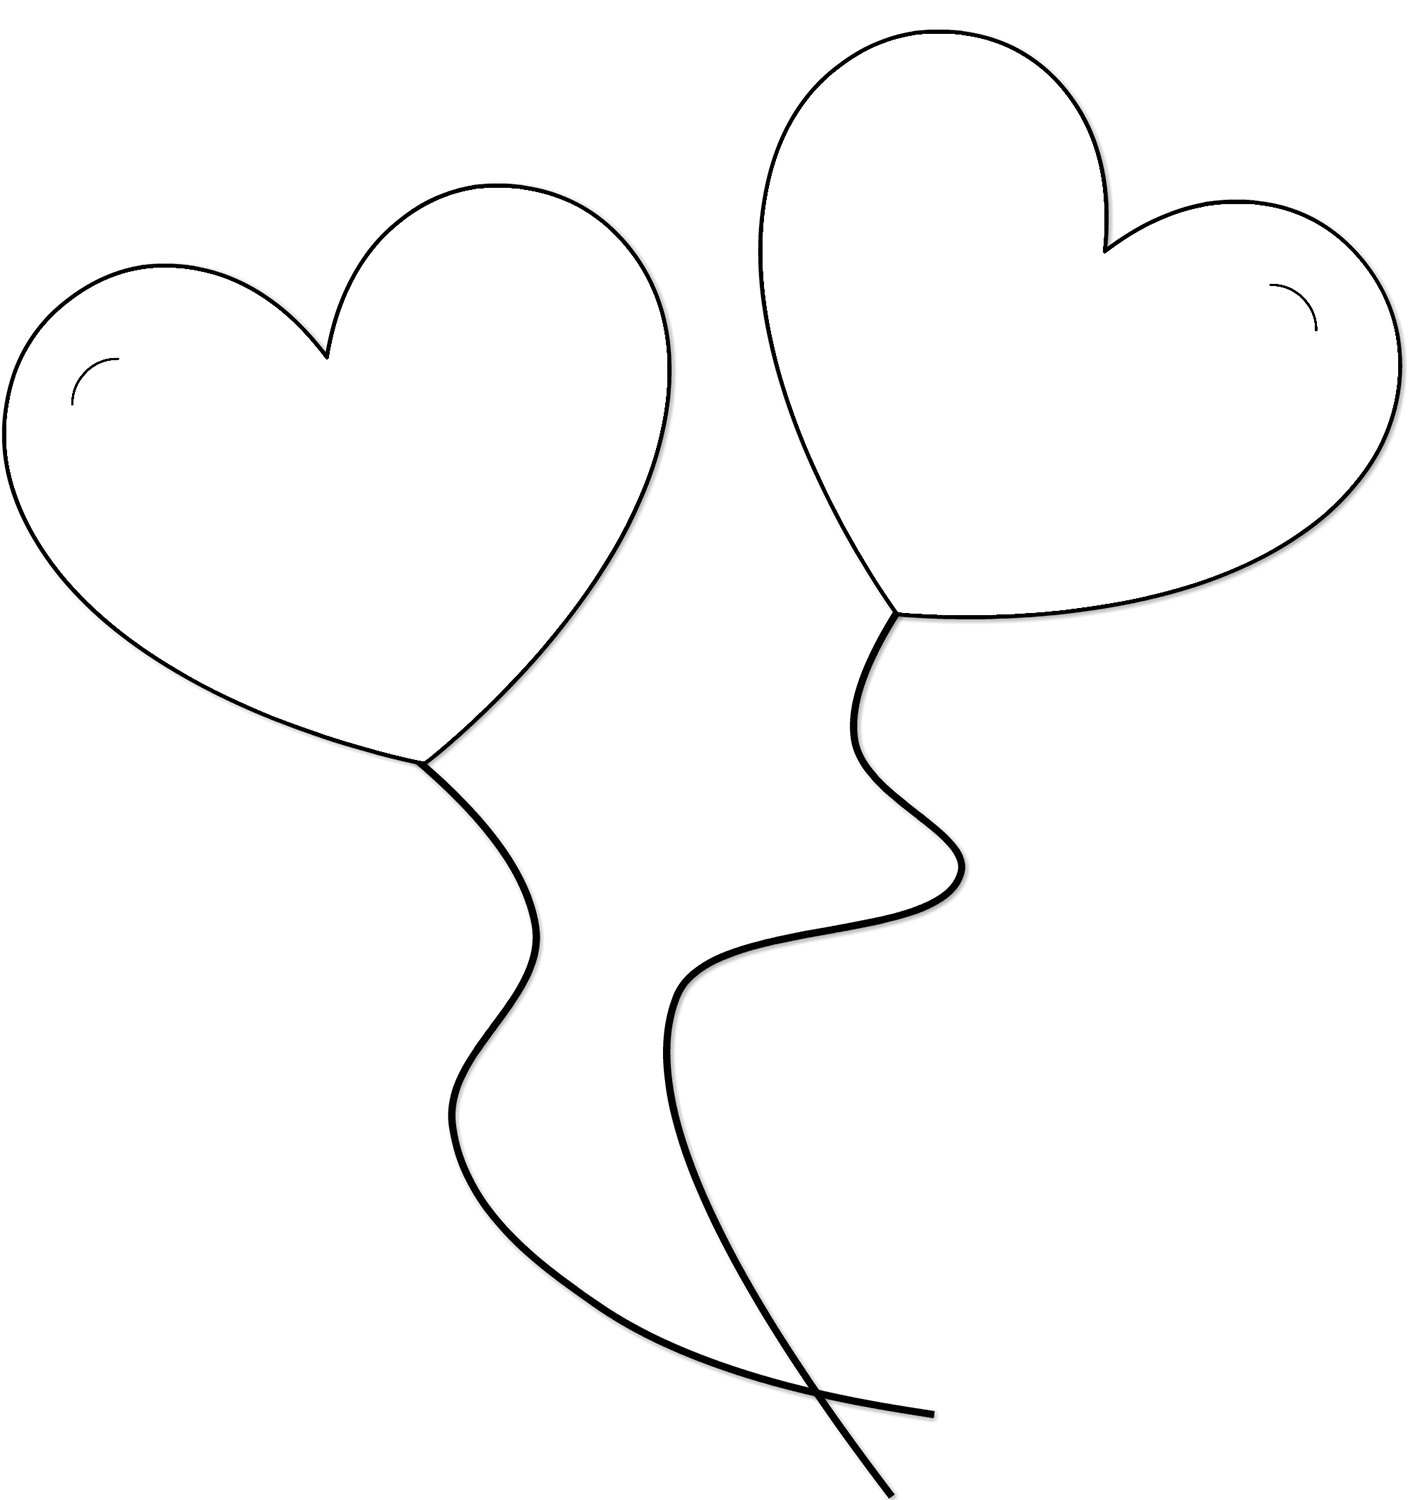 Two Heart Shaped Balloons Coloring Page